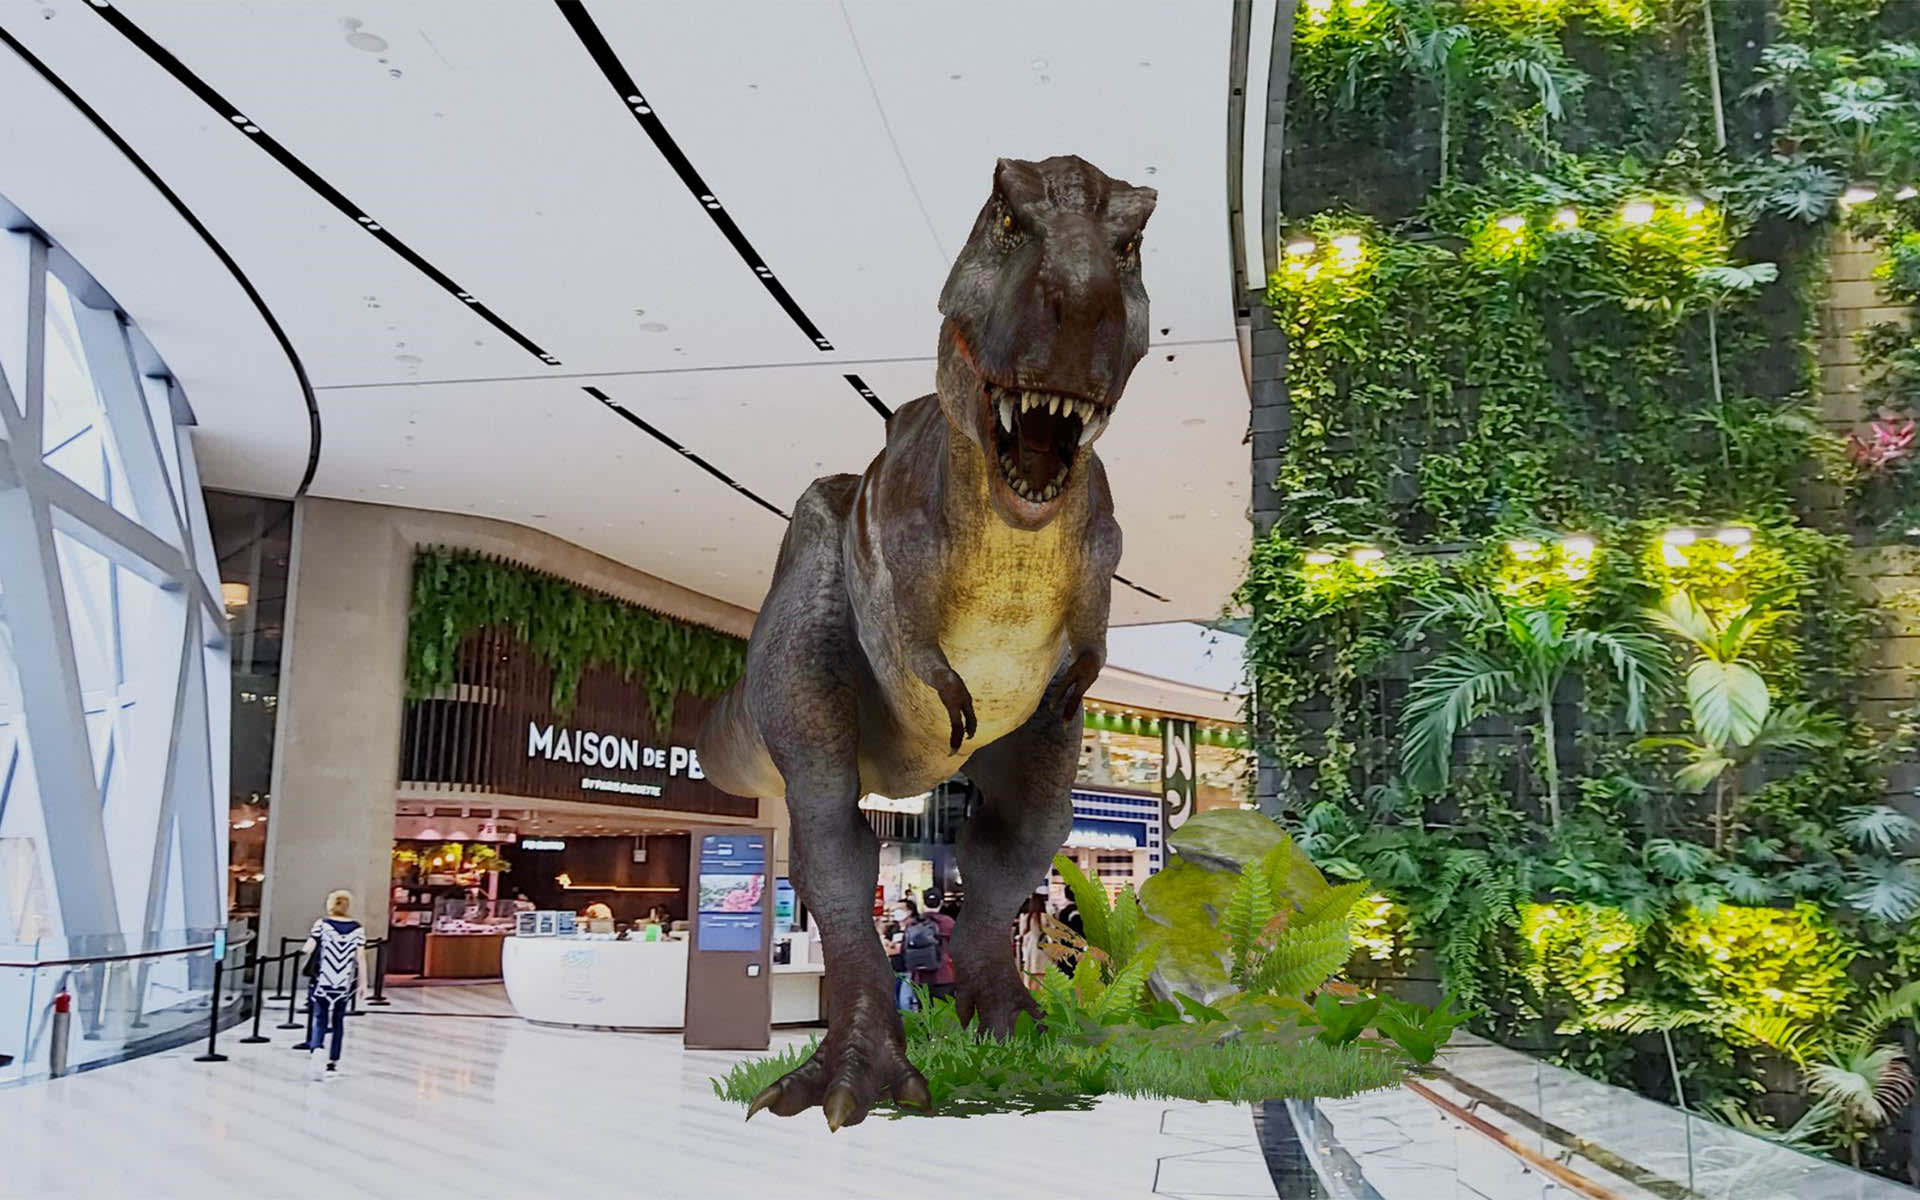 Get Up Close With Dinosaurs At Jewel Changi Airport With This New Immersive AR Game